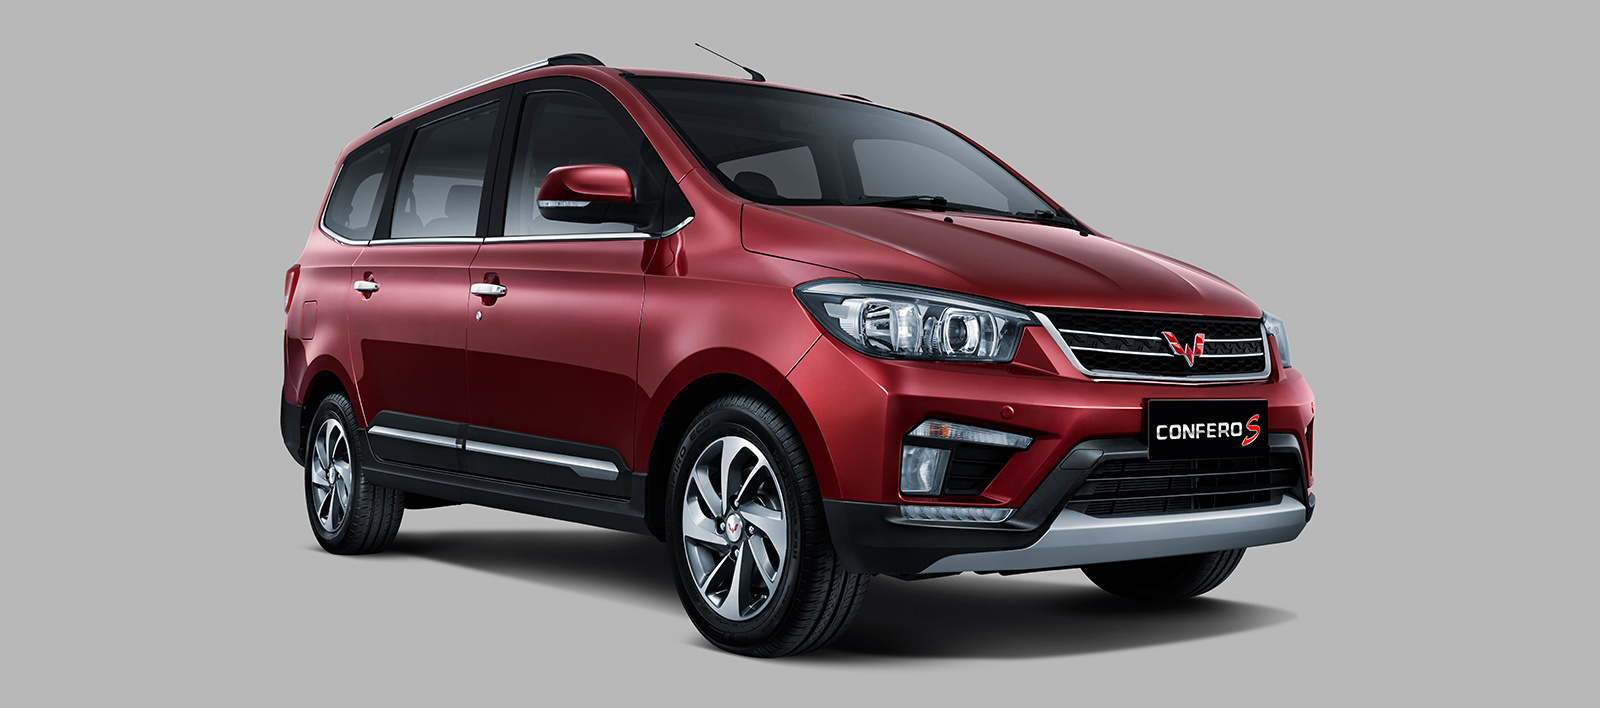 Image The 5 Best Features of Wuling Confero S